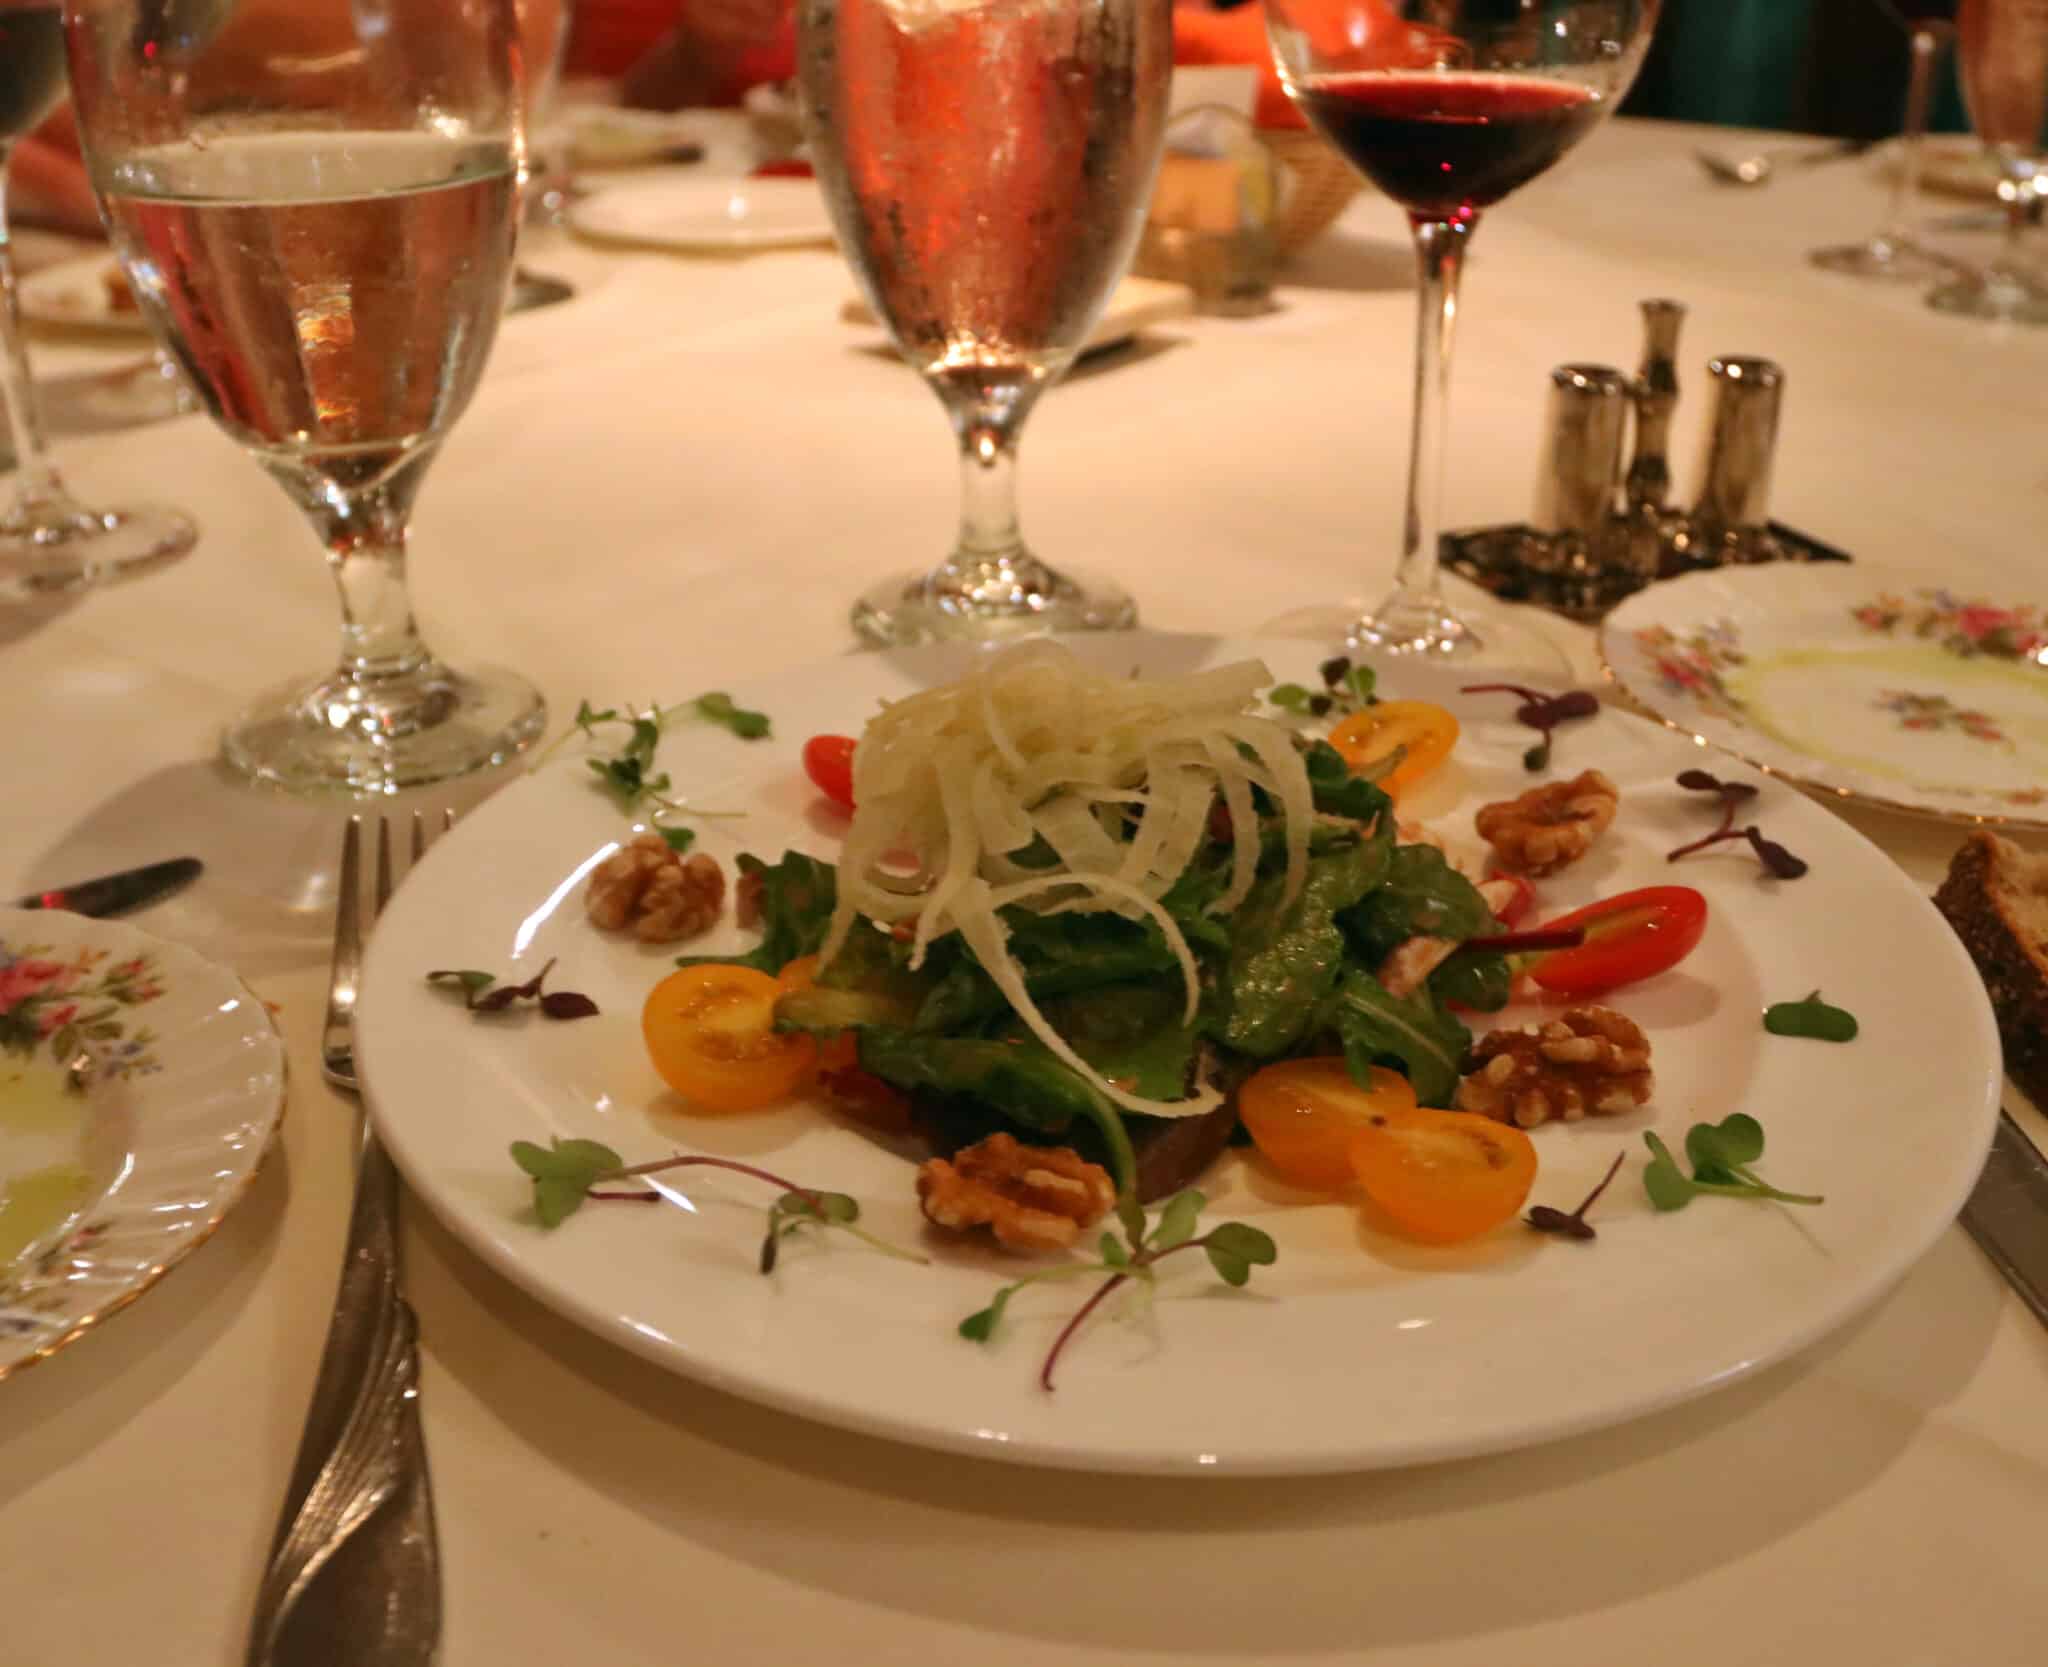 A lovely salad at The Cellar Restaurant (Credit: Bill Rockwell)